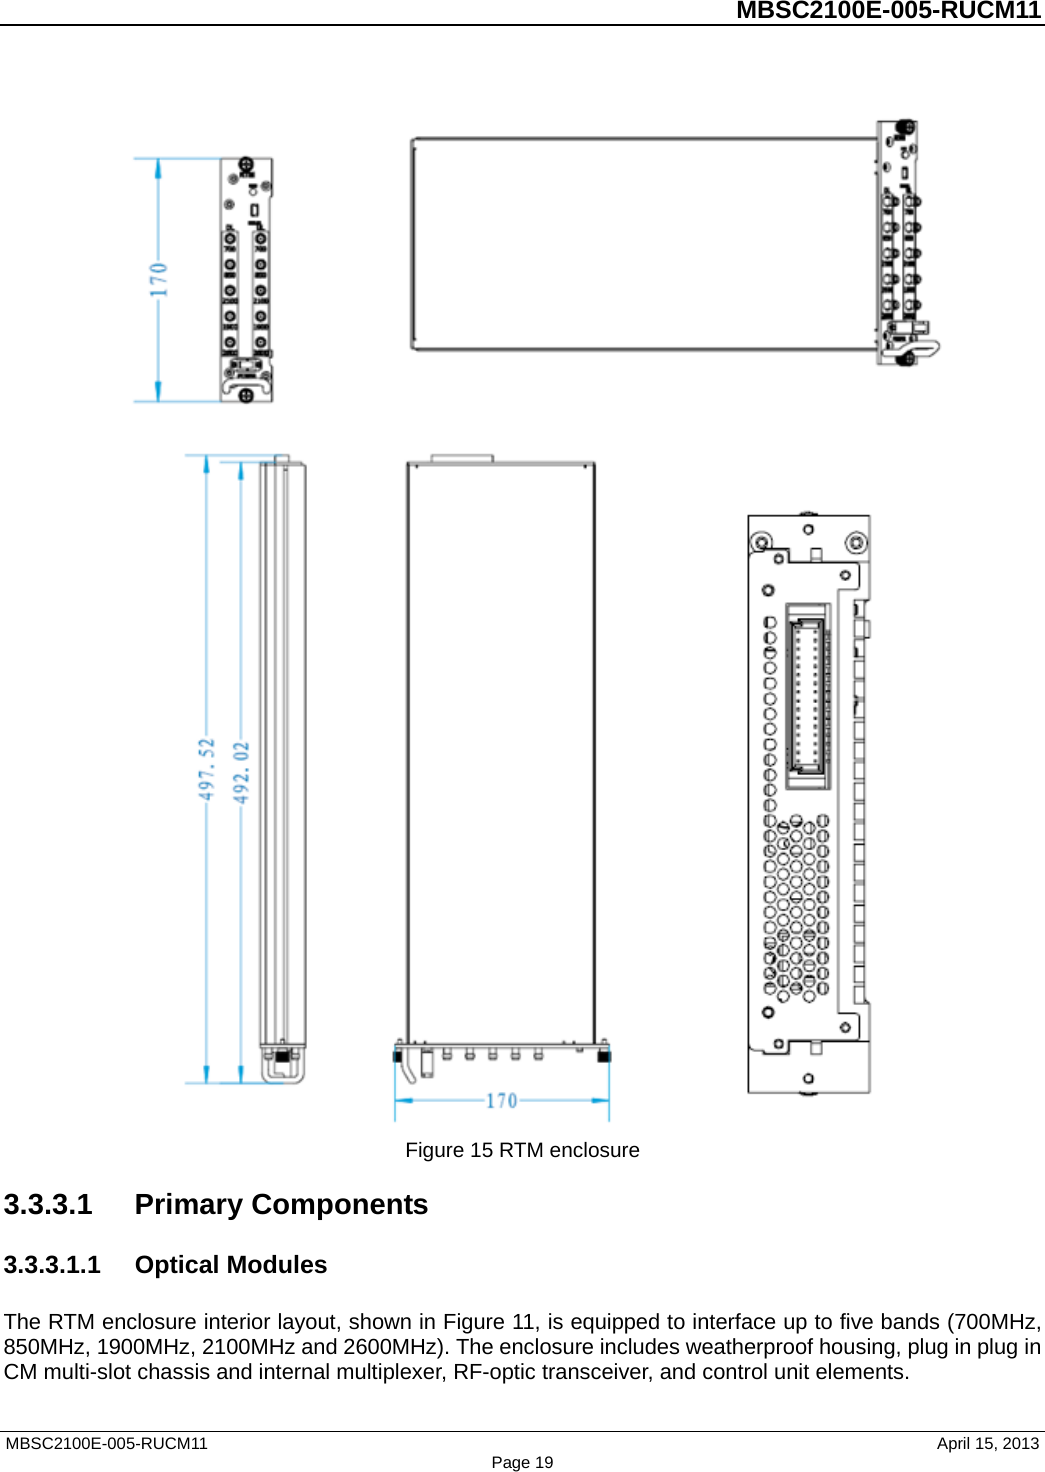          MBSC2100E-005-RUCM11    Figure 15 RTM enclosure 3.3.3.1 Primary Components 3.3.3.1.1 Optical Modules The RTM enclosure interior layout, shown in Figure 11, is equipped to interface up to five bands (700MHz, 850MHz, 1900MHz, 2100MHz and 2600MHz). The enclosure includes weatherproof housing, plug in plug in CM multi-slot chassis and internal multiplexer, RF-optic transceiver, and control unit elements. MBSC2100E-005-RUCM11                                April 15, 2013 Page 19 